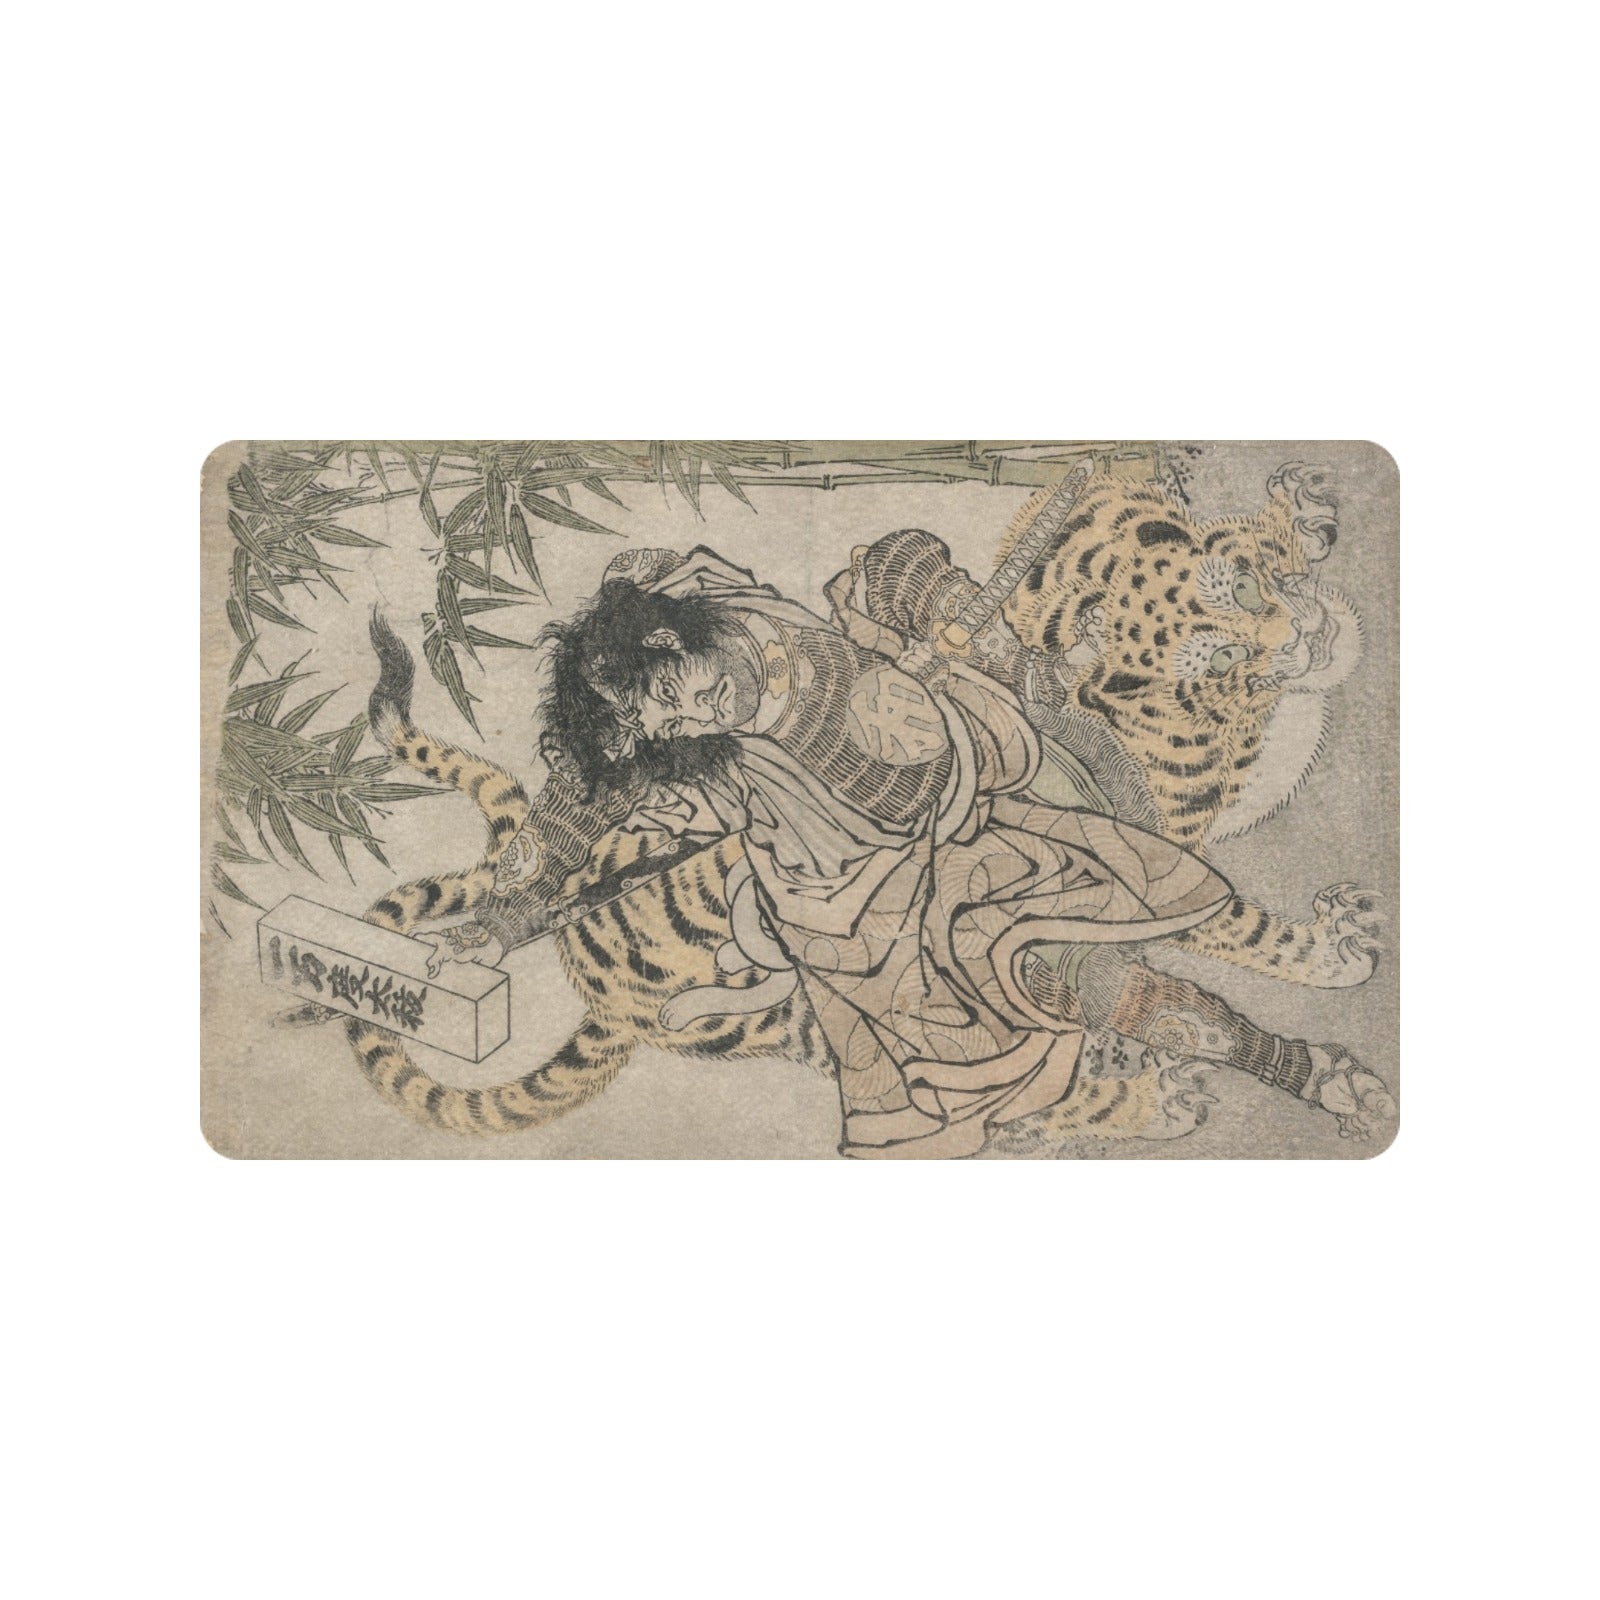 a drawing of a man riding a tiger